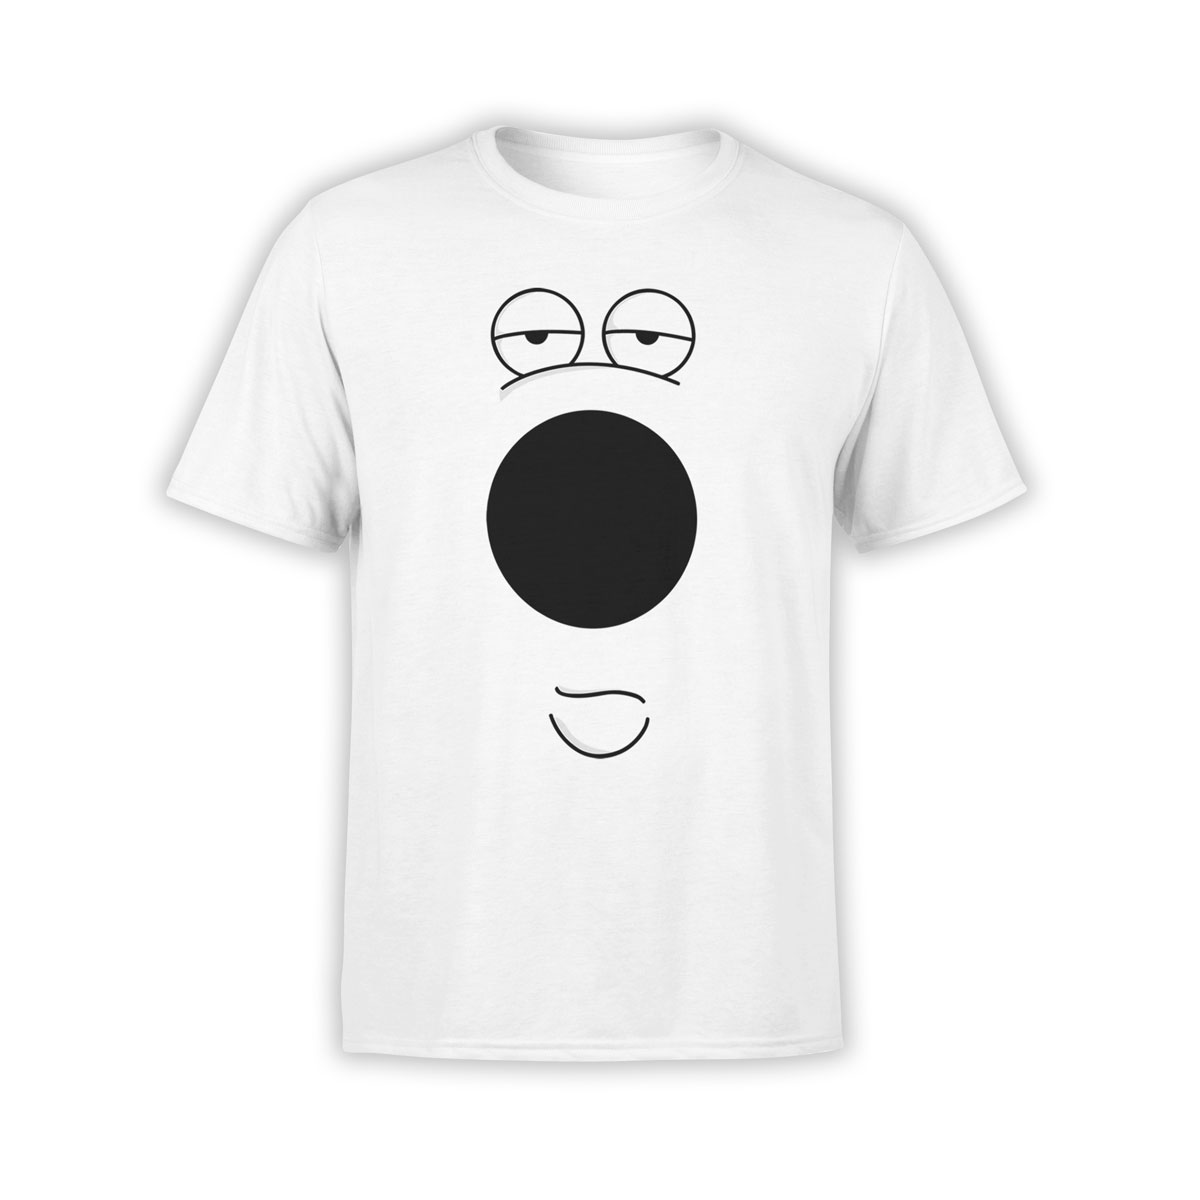 Family Guy T-Shirts. Brian Griffin Unisex T-Shirt. 100% Ultra